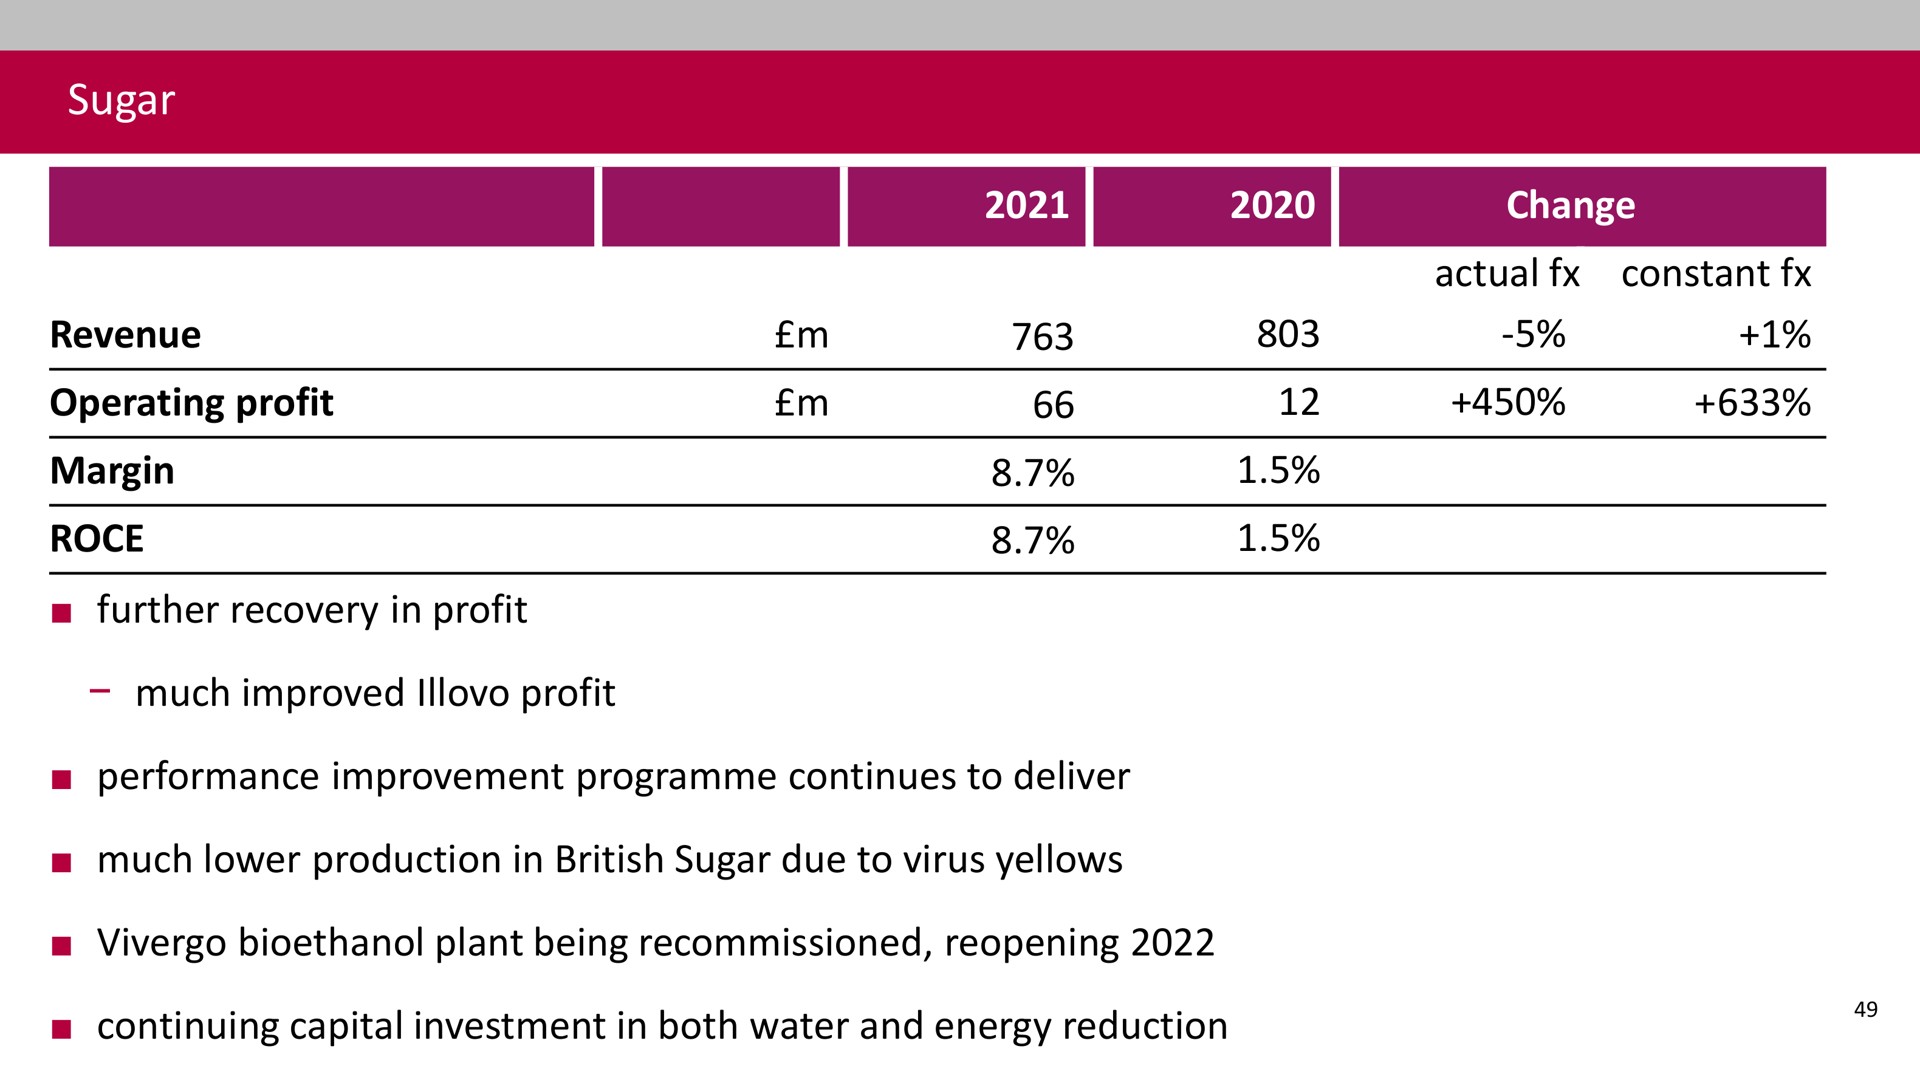 sugar revenue operating profit margin change actual constant further recovery in profit much improved profit performance improvement continues to deliver much lower production in sugar due to virus yellows plant being reopening continuing capital investment in both water and energy reduction | Associated British Foods